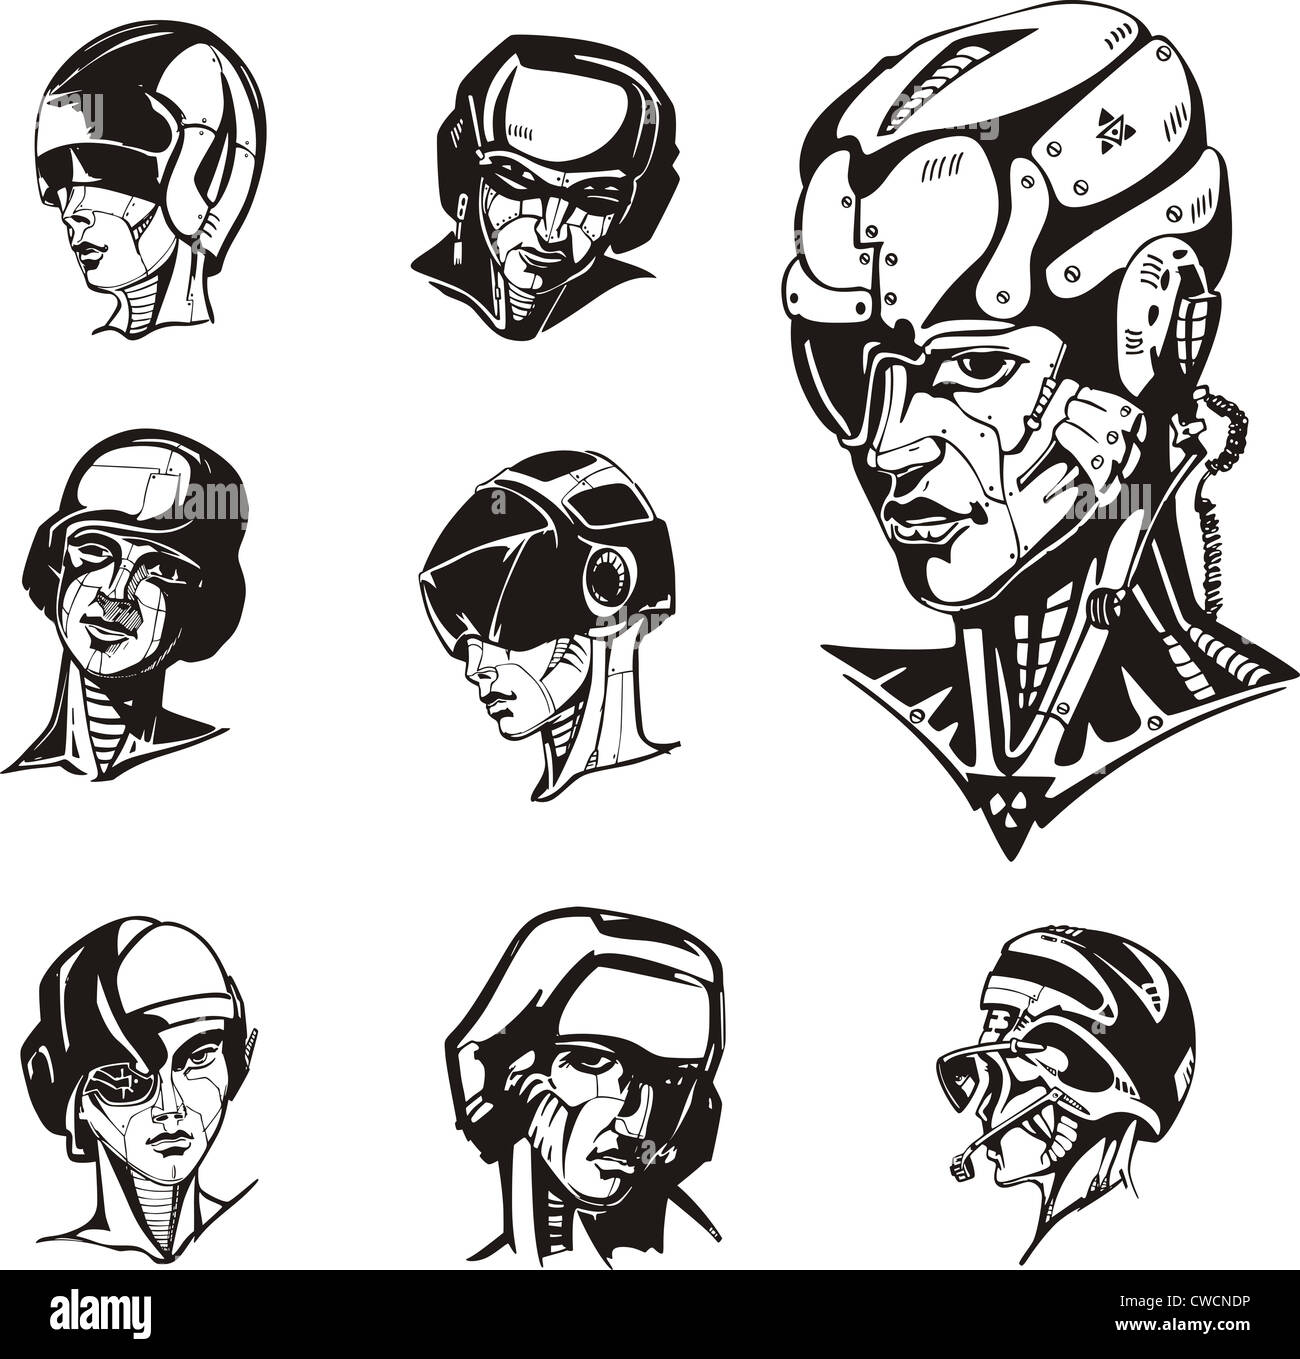 Heads of cyborg women. Set of black and white vector illustrations. Stock Photo